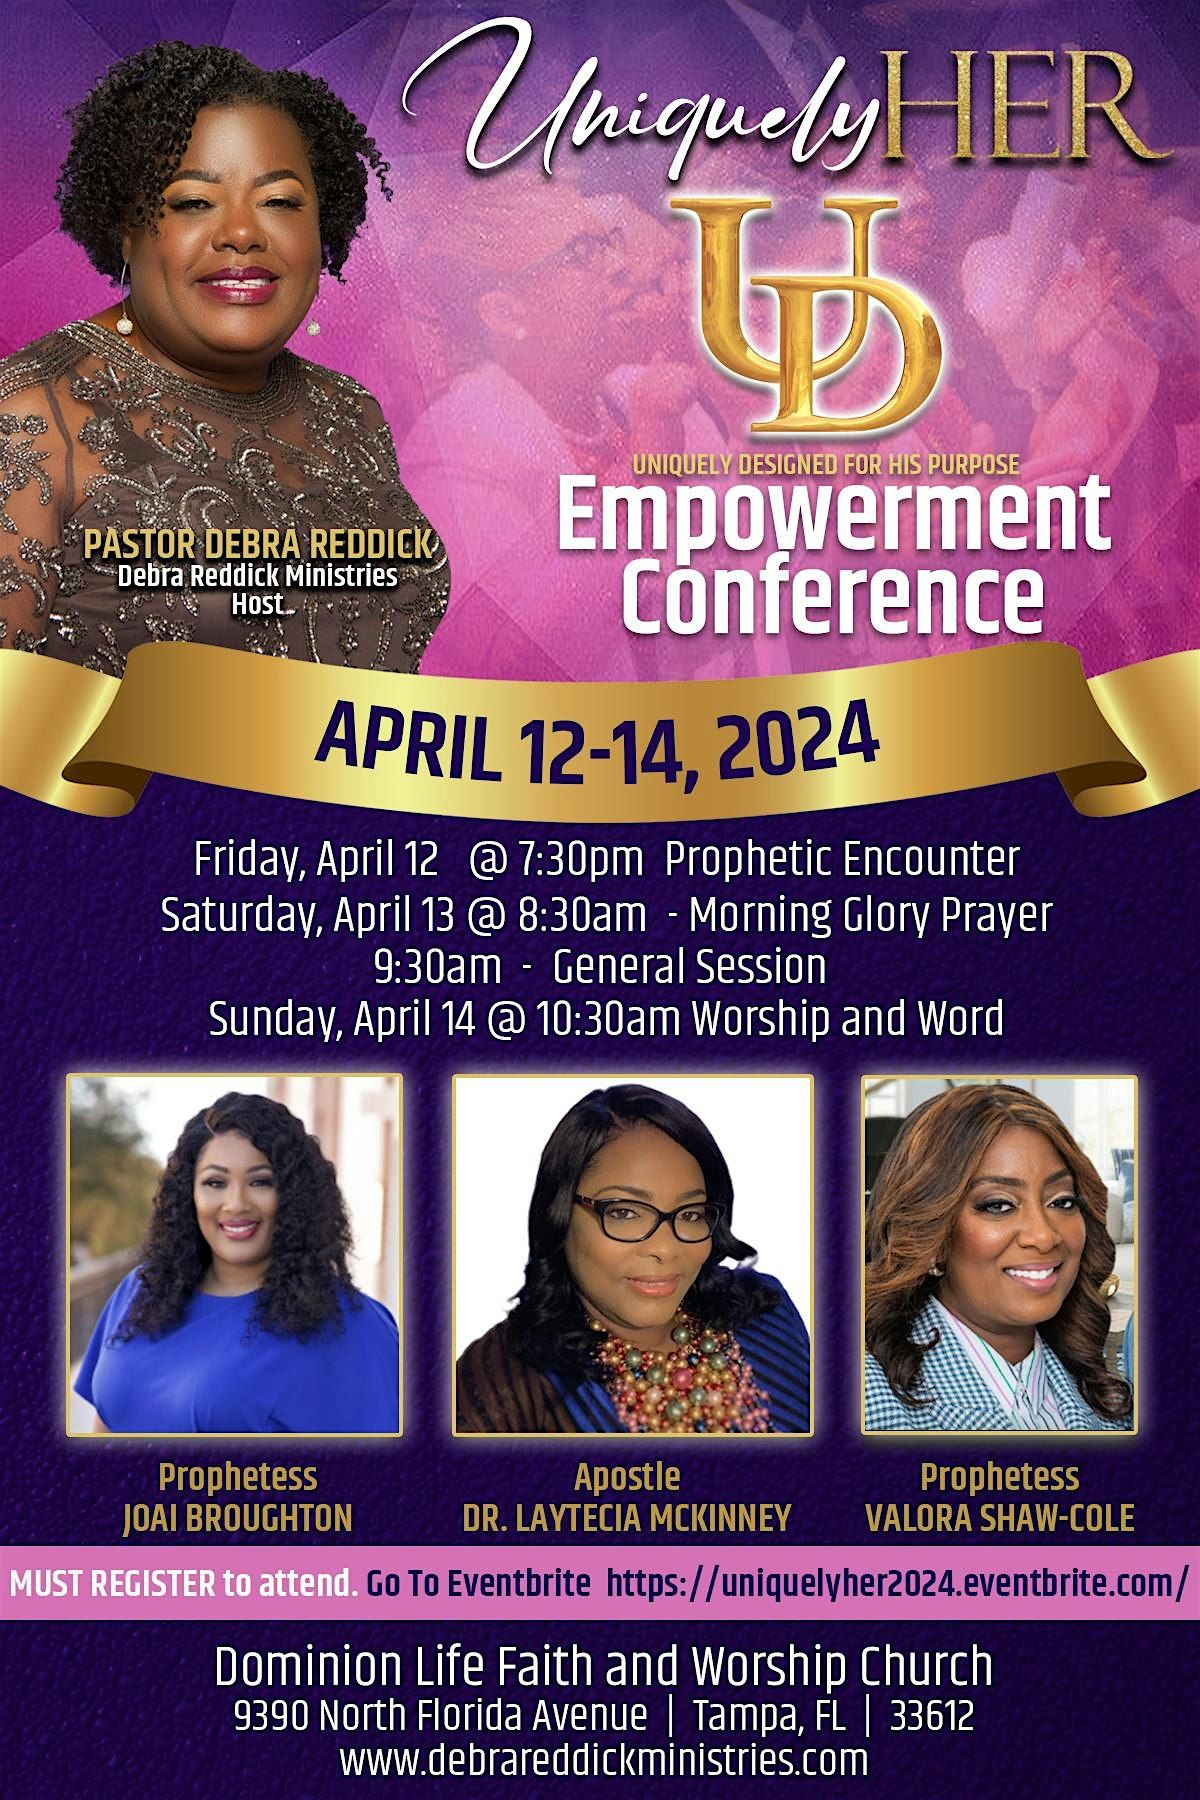 Uniquely HER  - UD Empowerment Conference